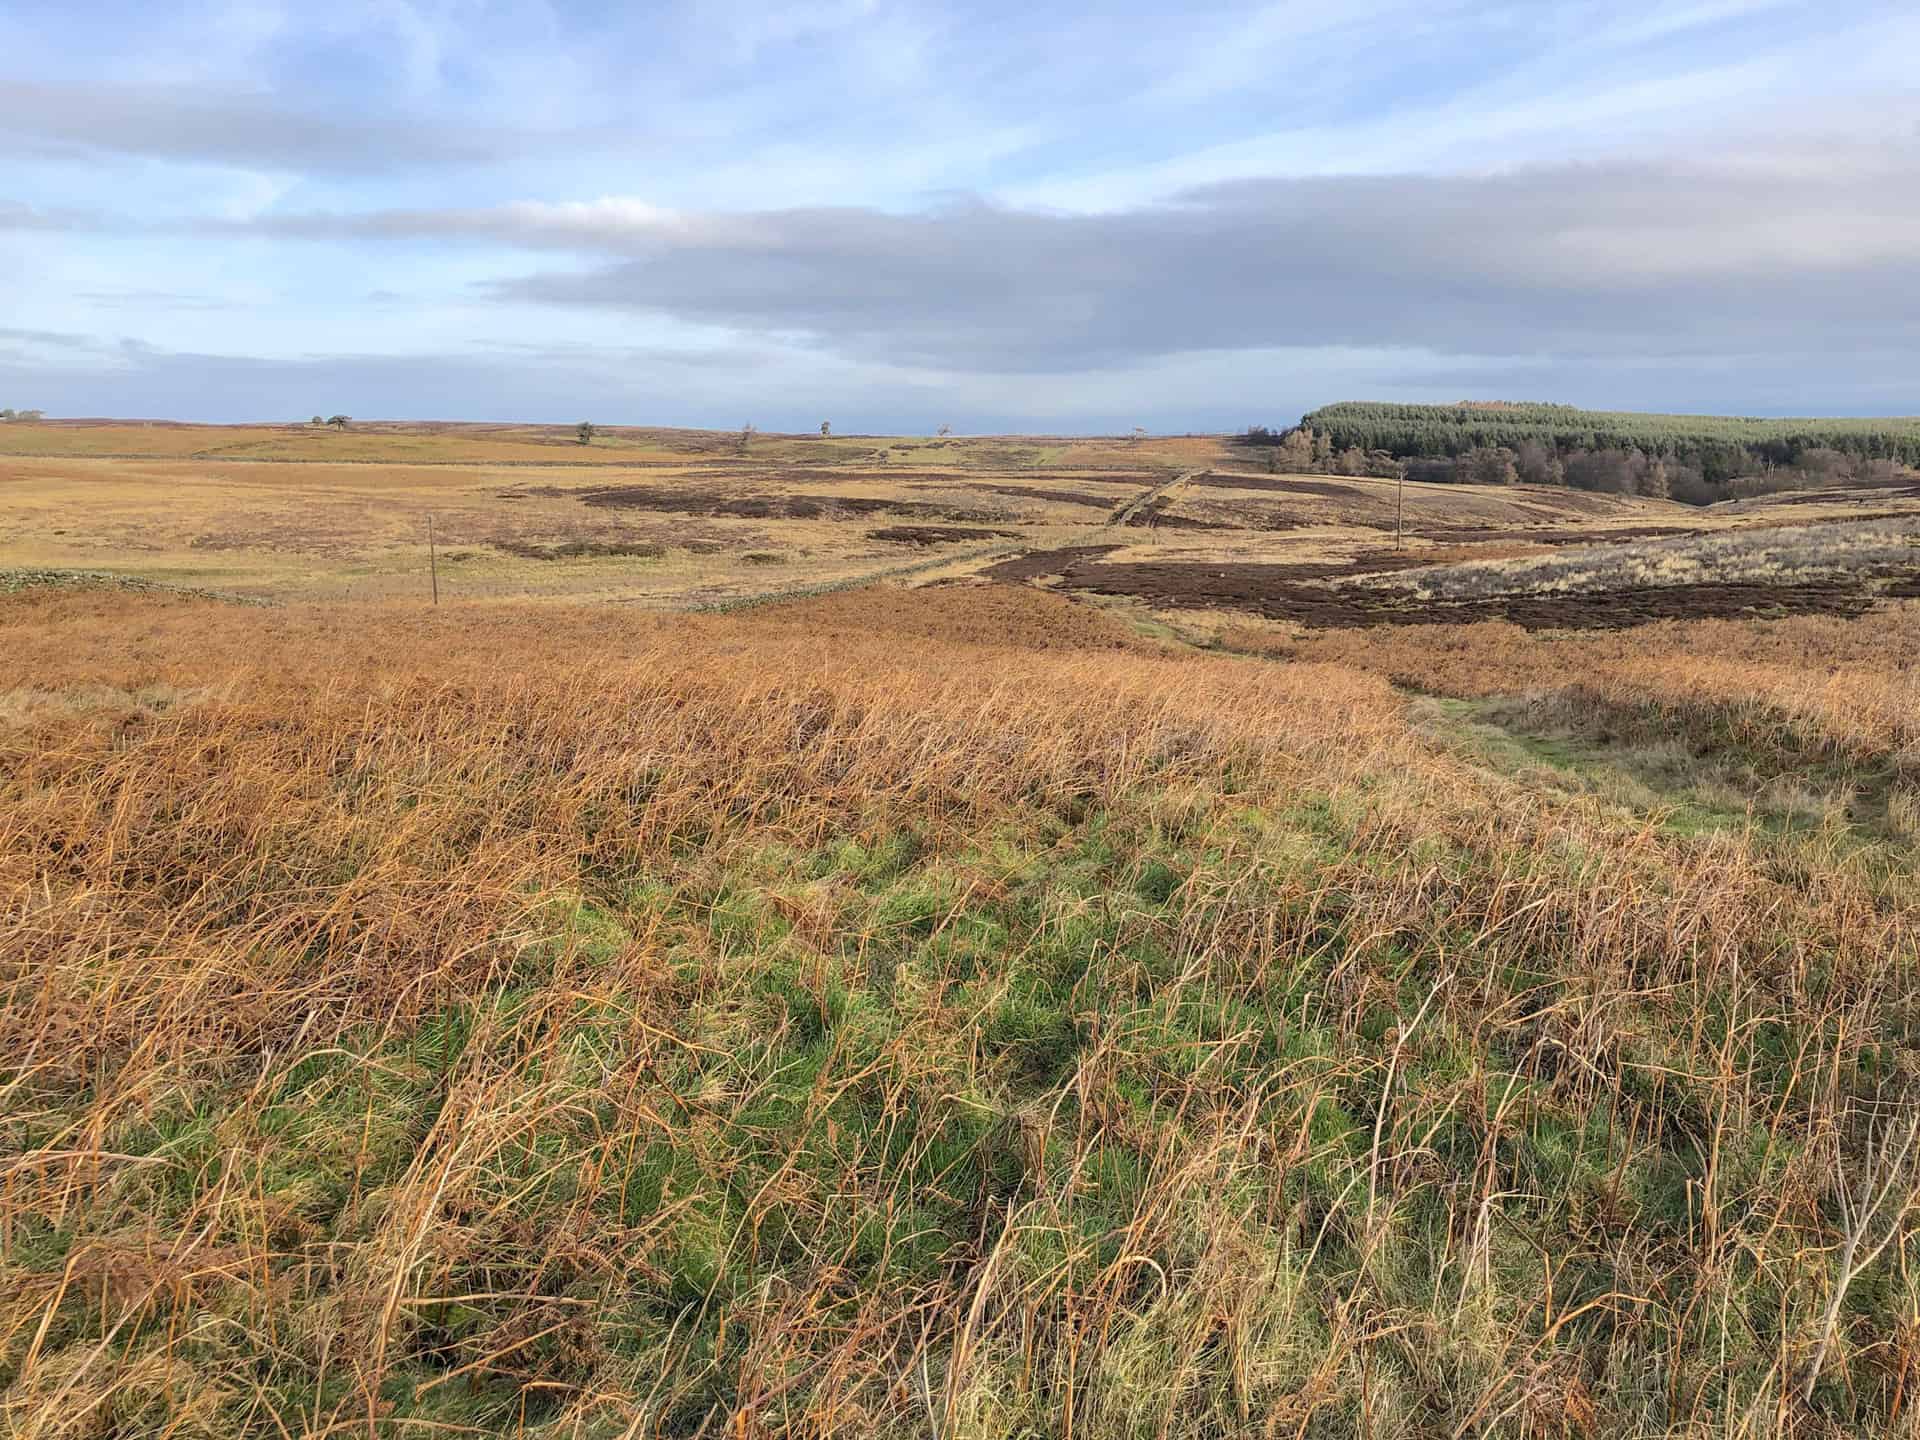 Witton Moor as seen during the Jervaulx Abbey walk.